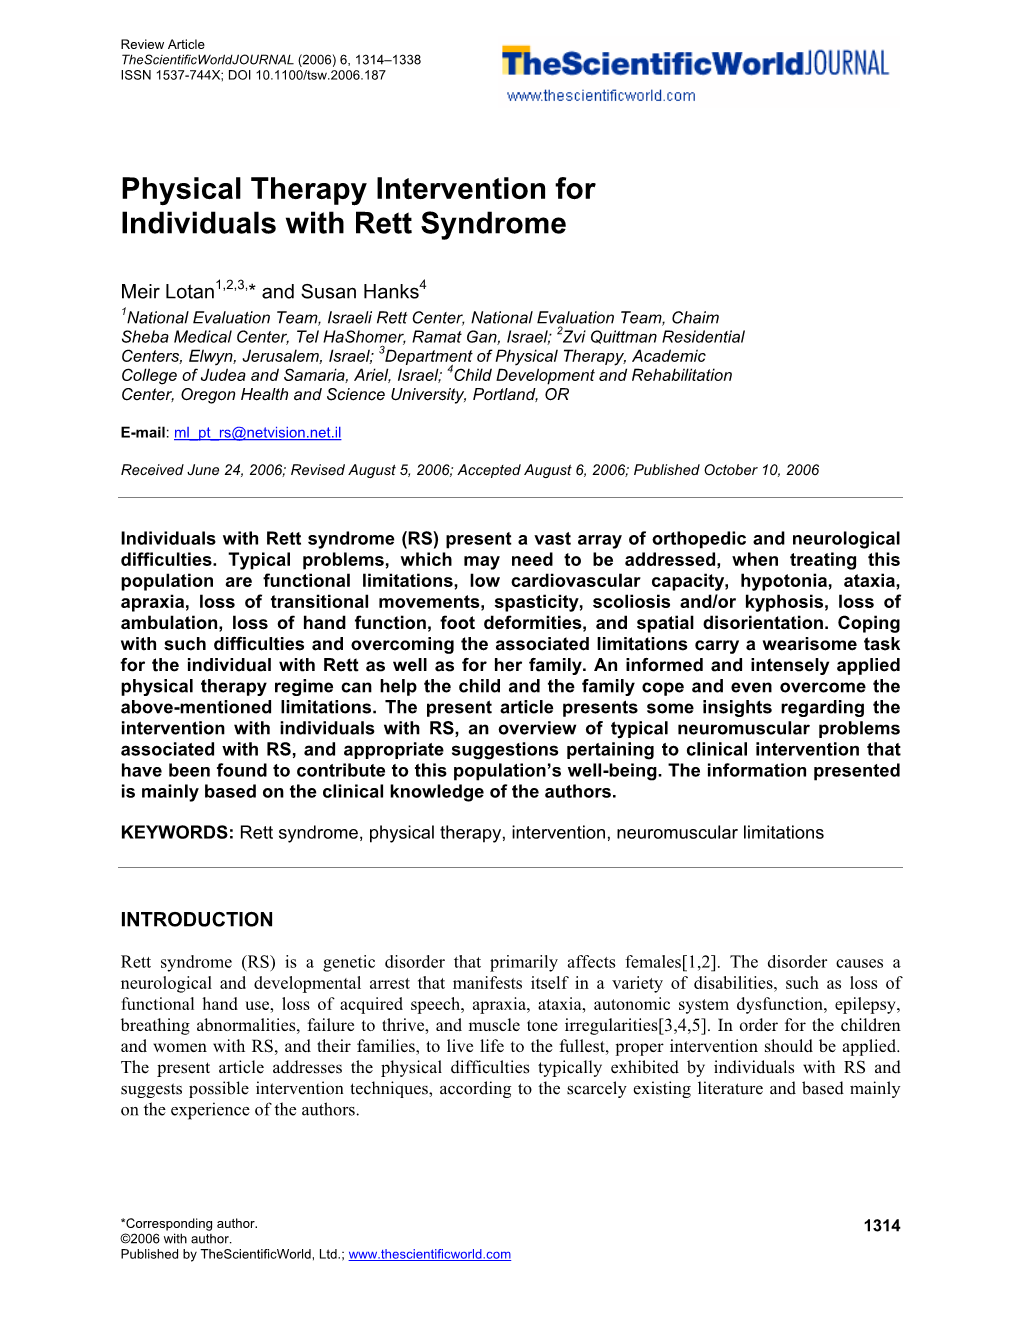 Physical Therapy Intervention for Individuals with Rett Syndrome